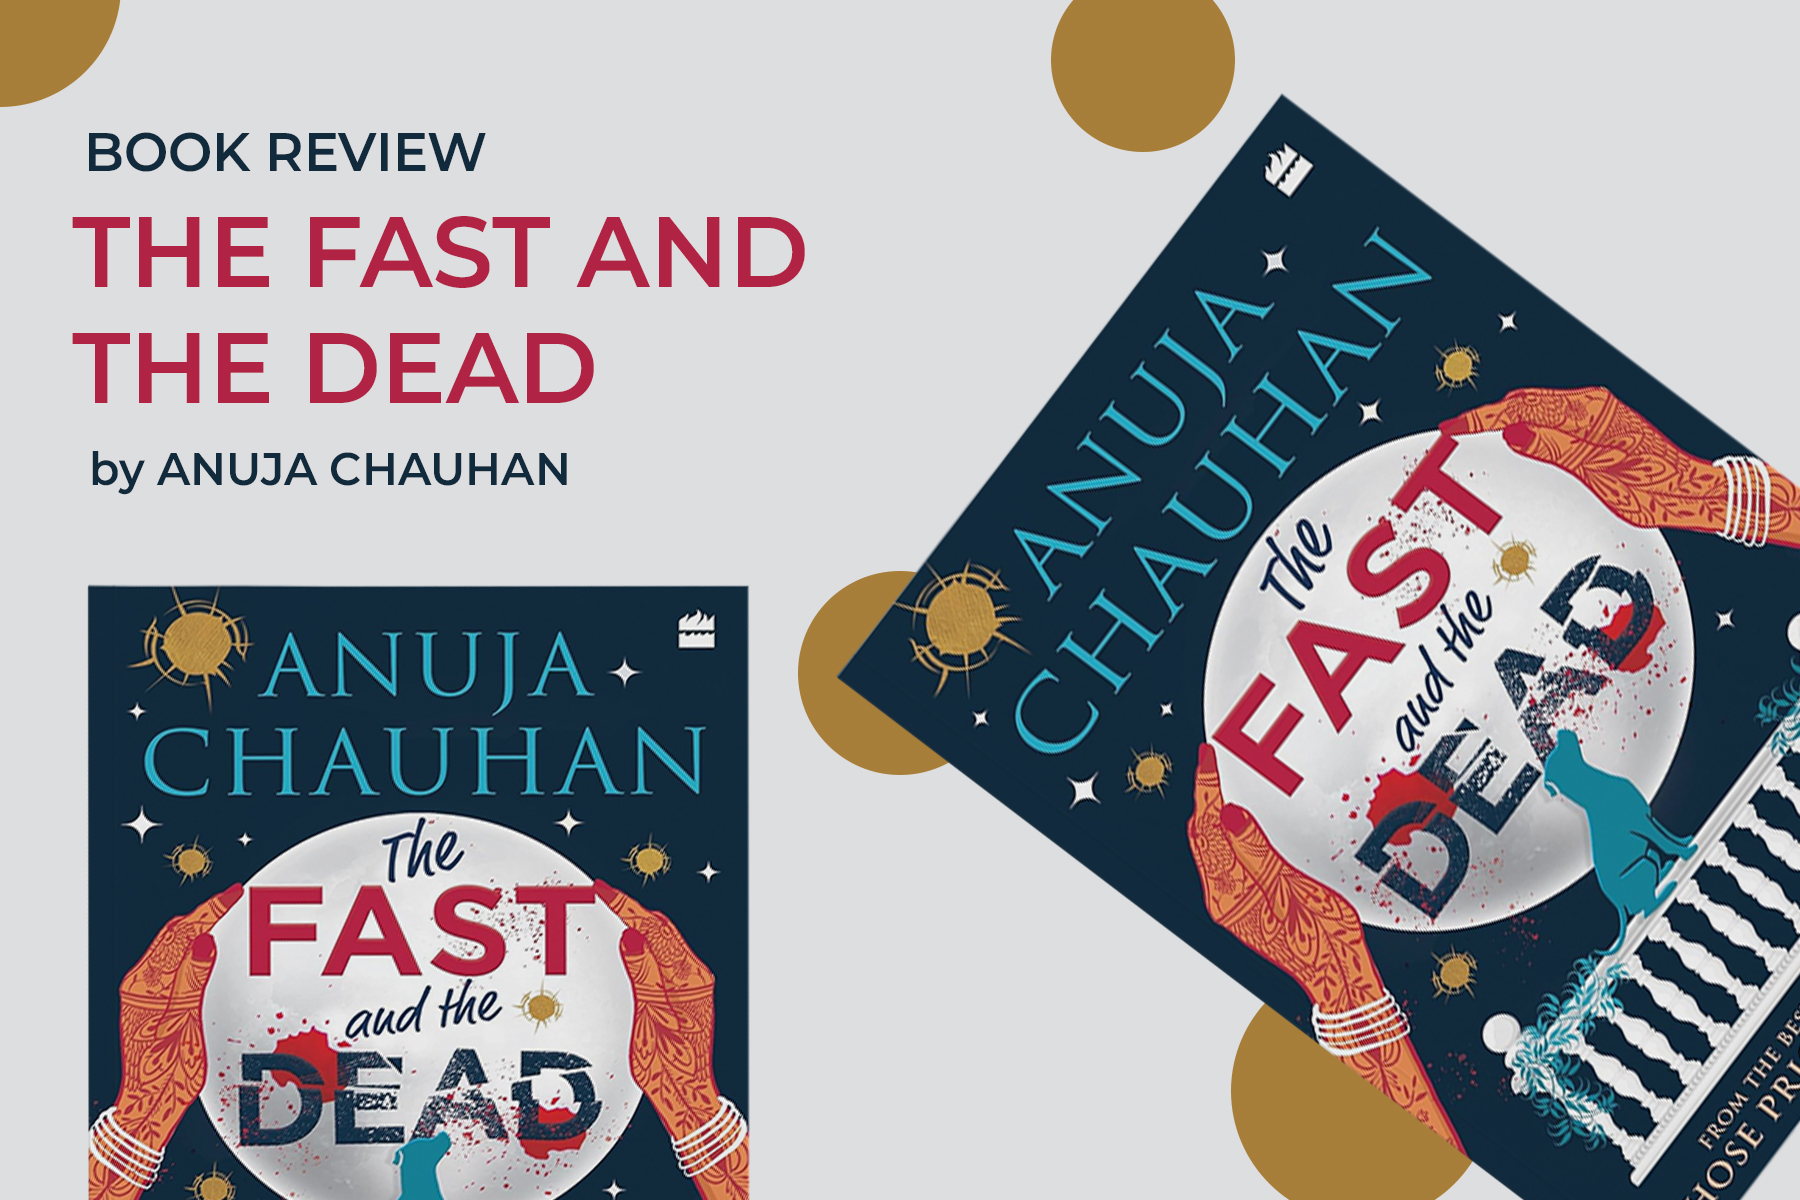 Book Review: The Fast and the Dead by Anuja Chauhan